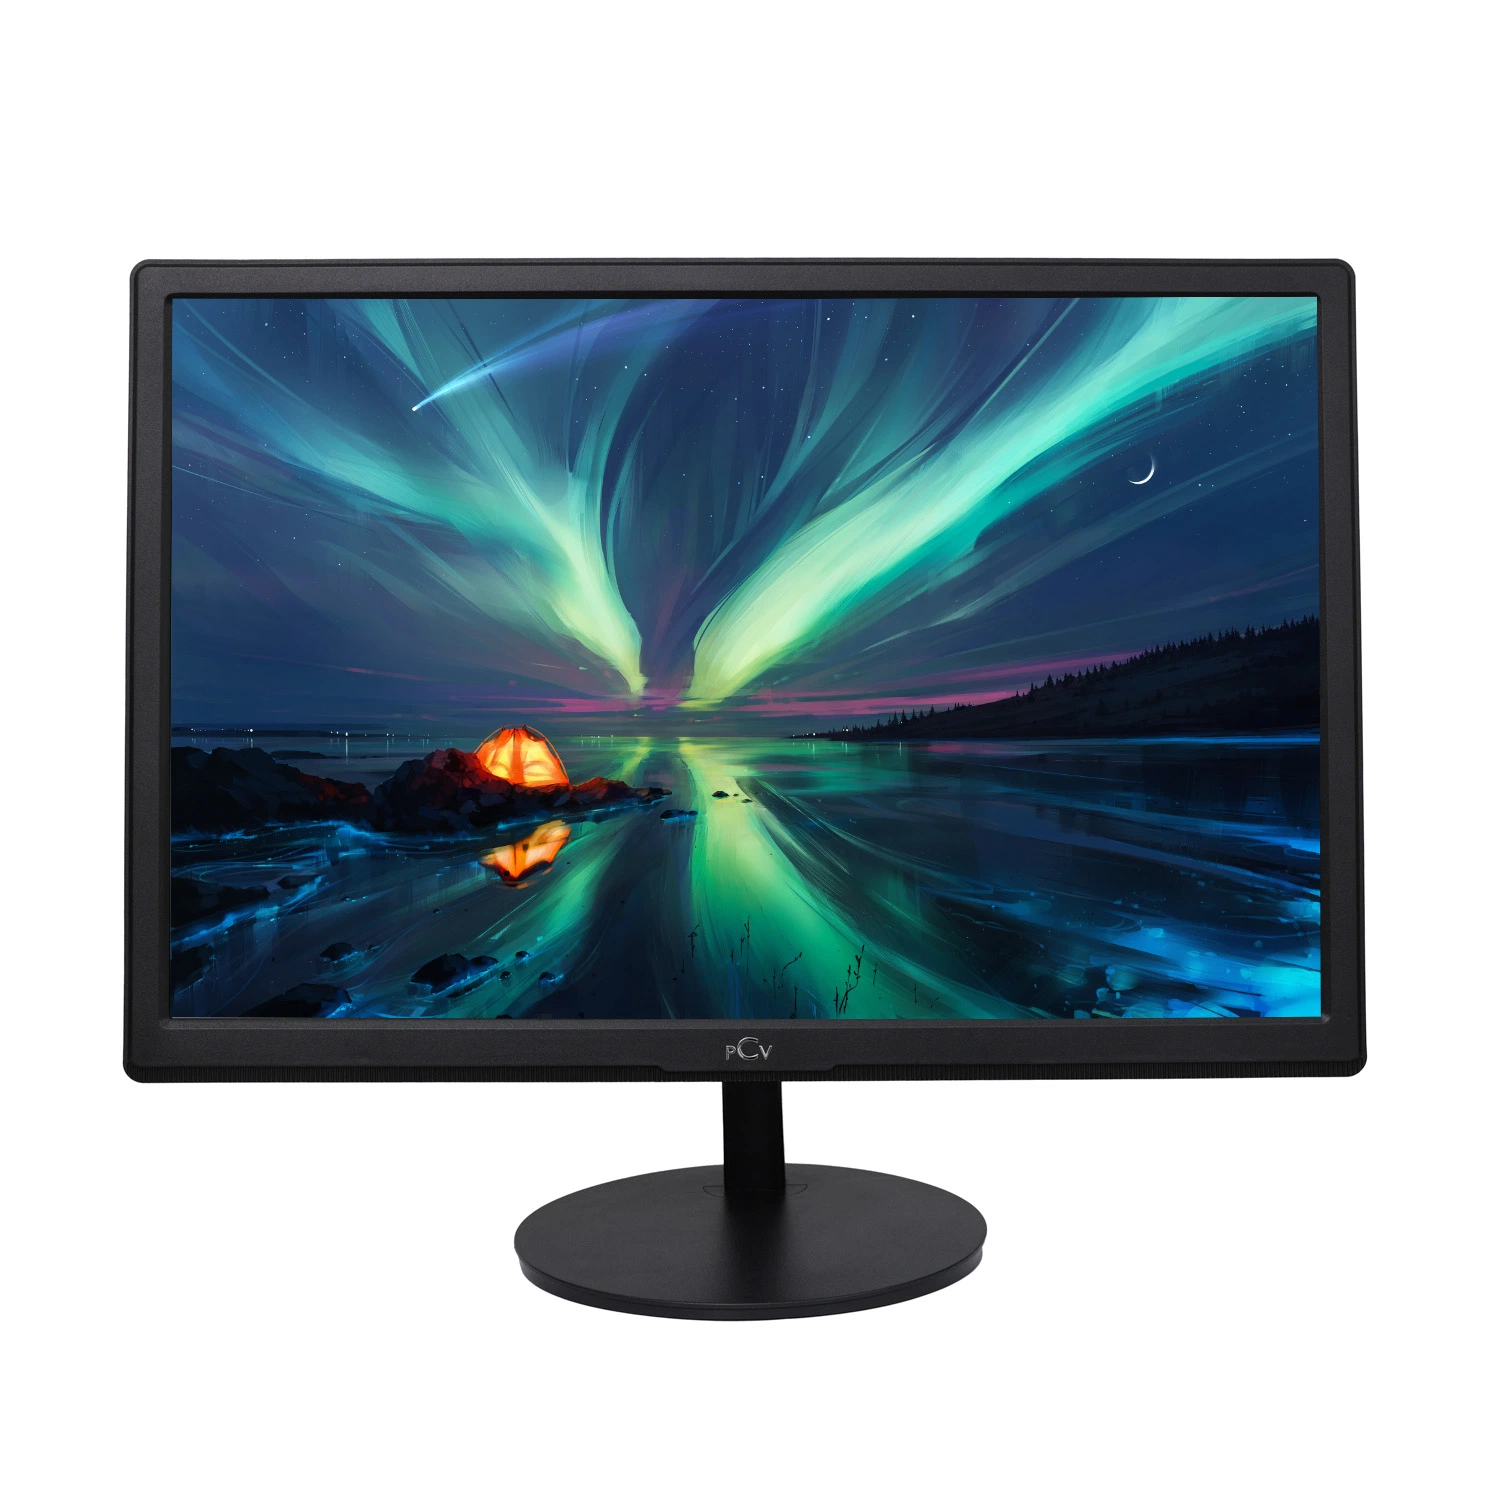 15/17/18.5/19/21.5/22/23/23.6/24/27inch Monitor Desktop Computer LED Monitor for Business & Study & Office Monitor